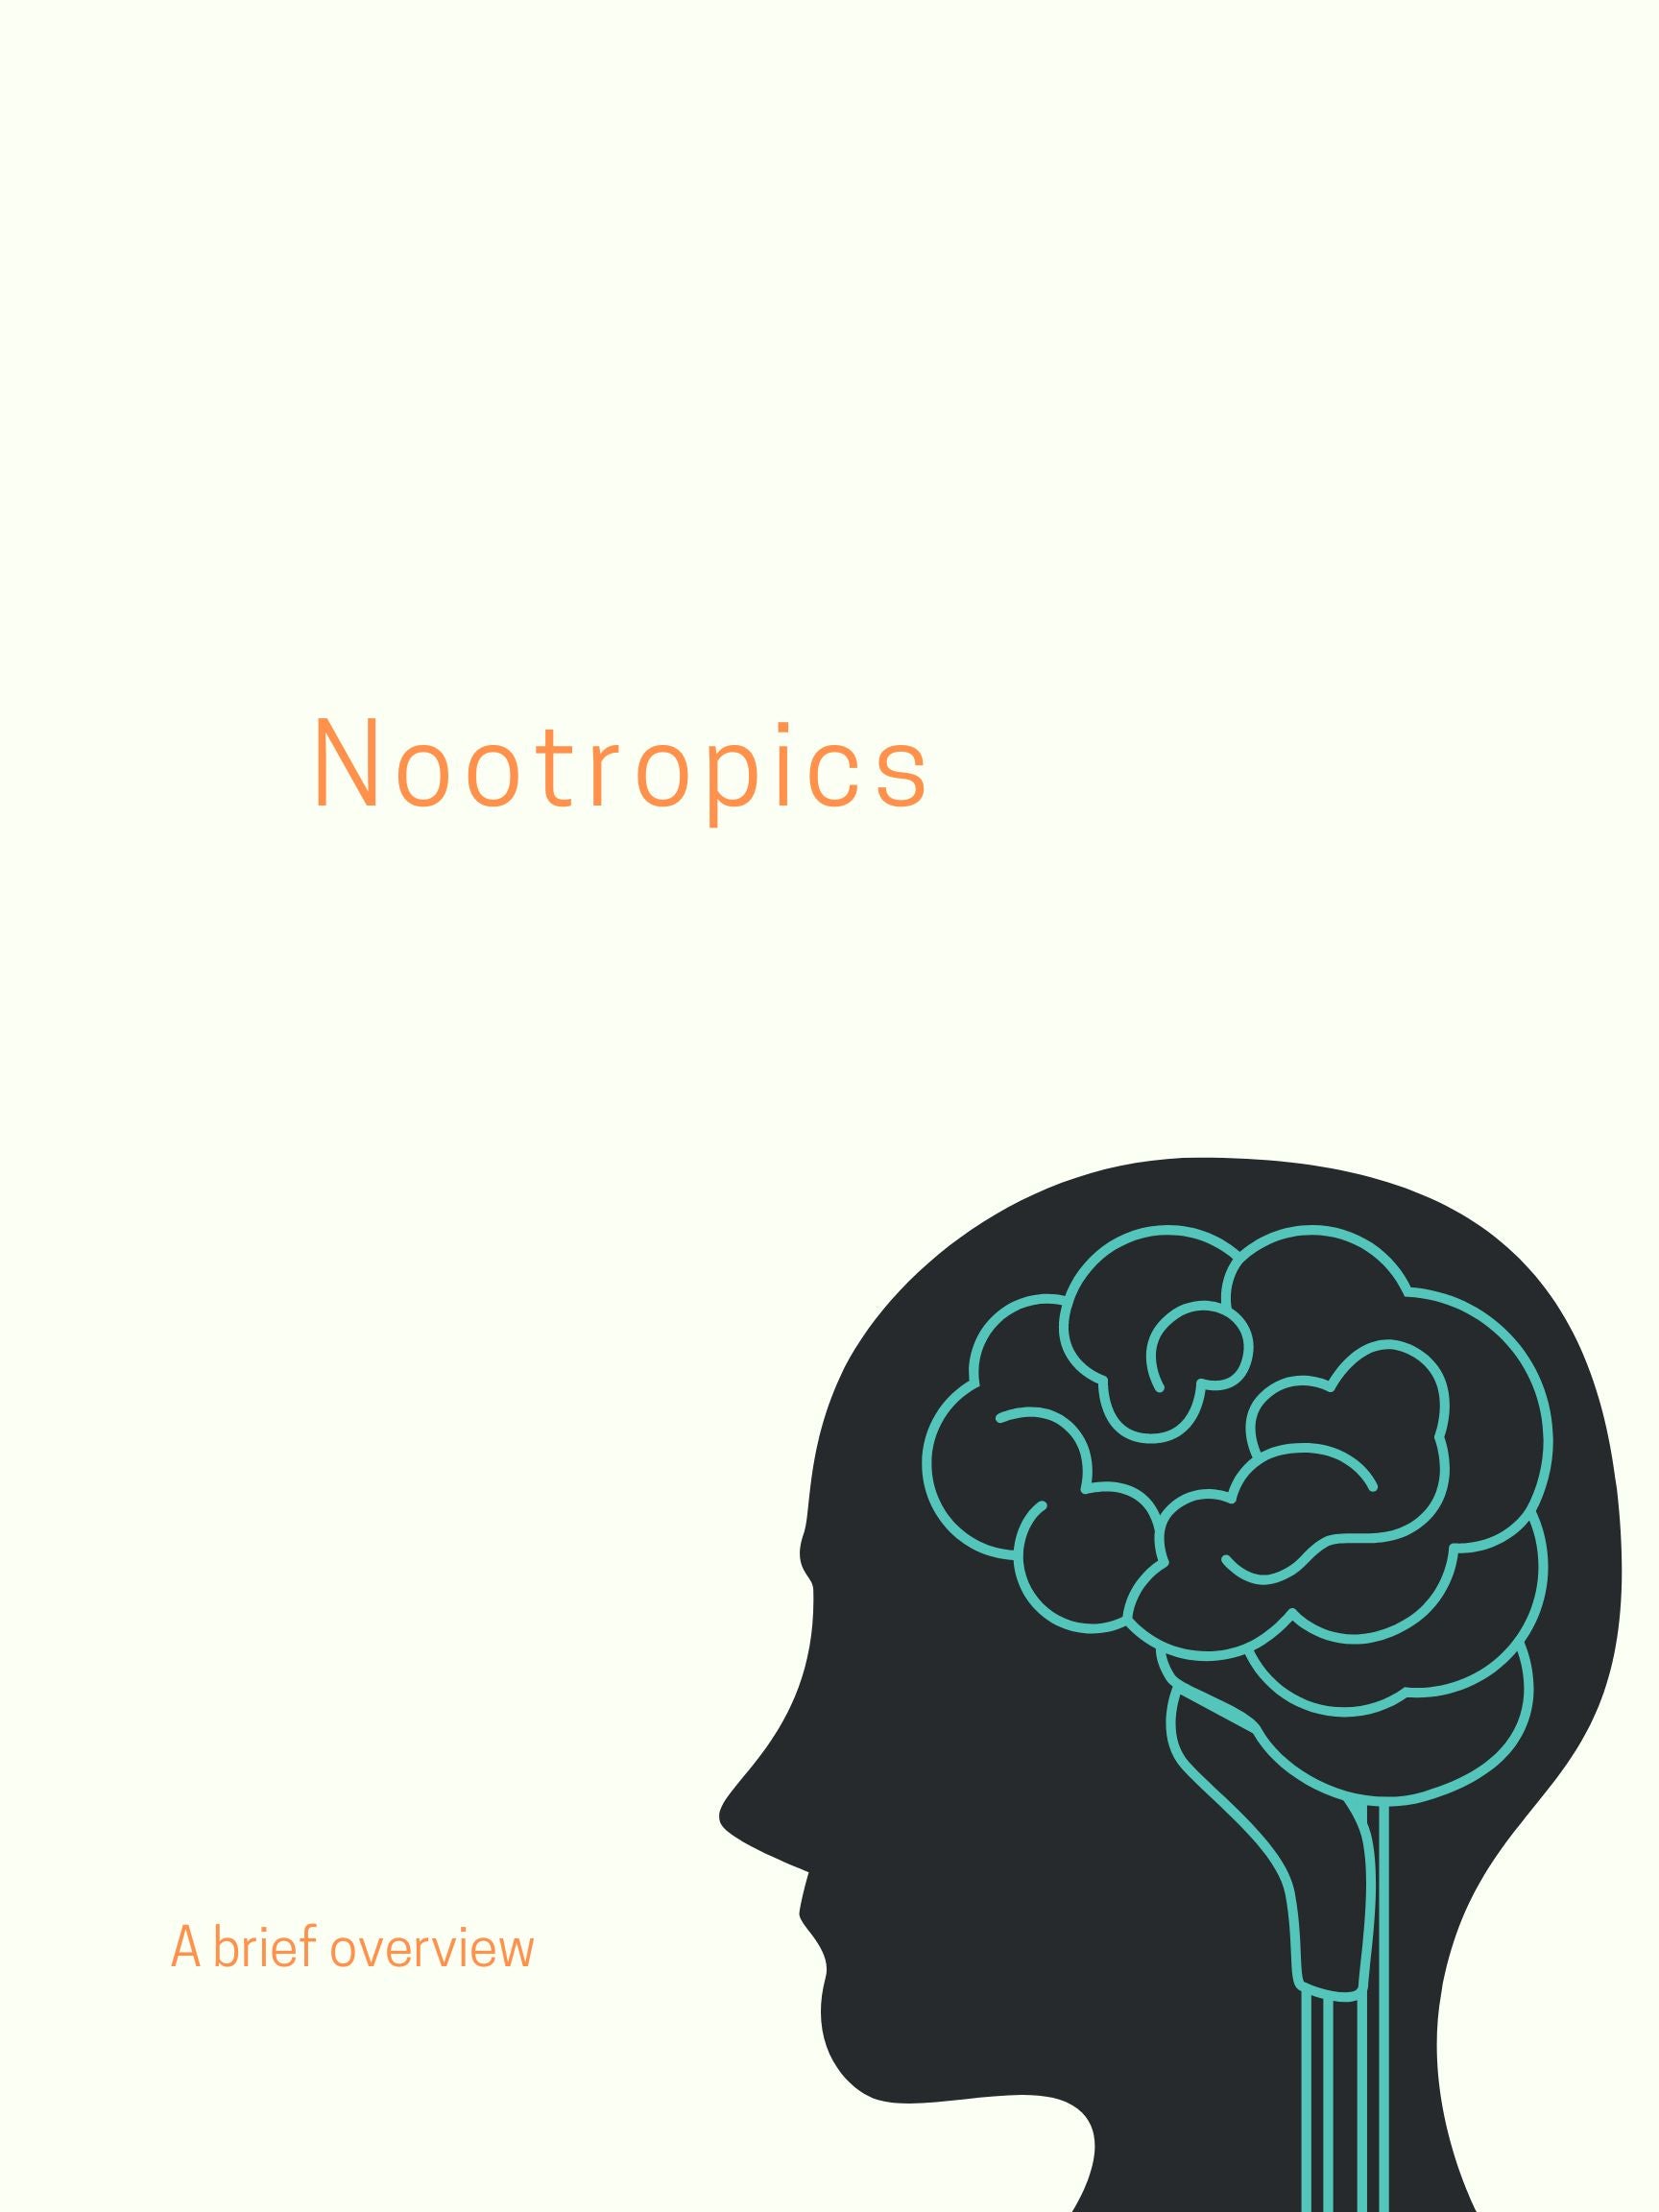 Nootropics Cover Image With Brain